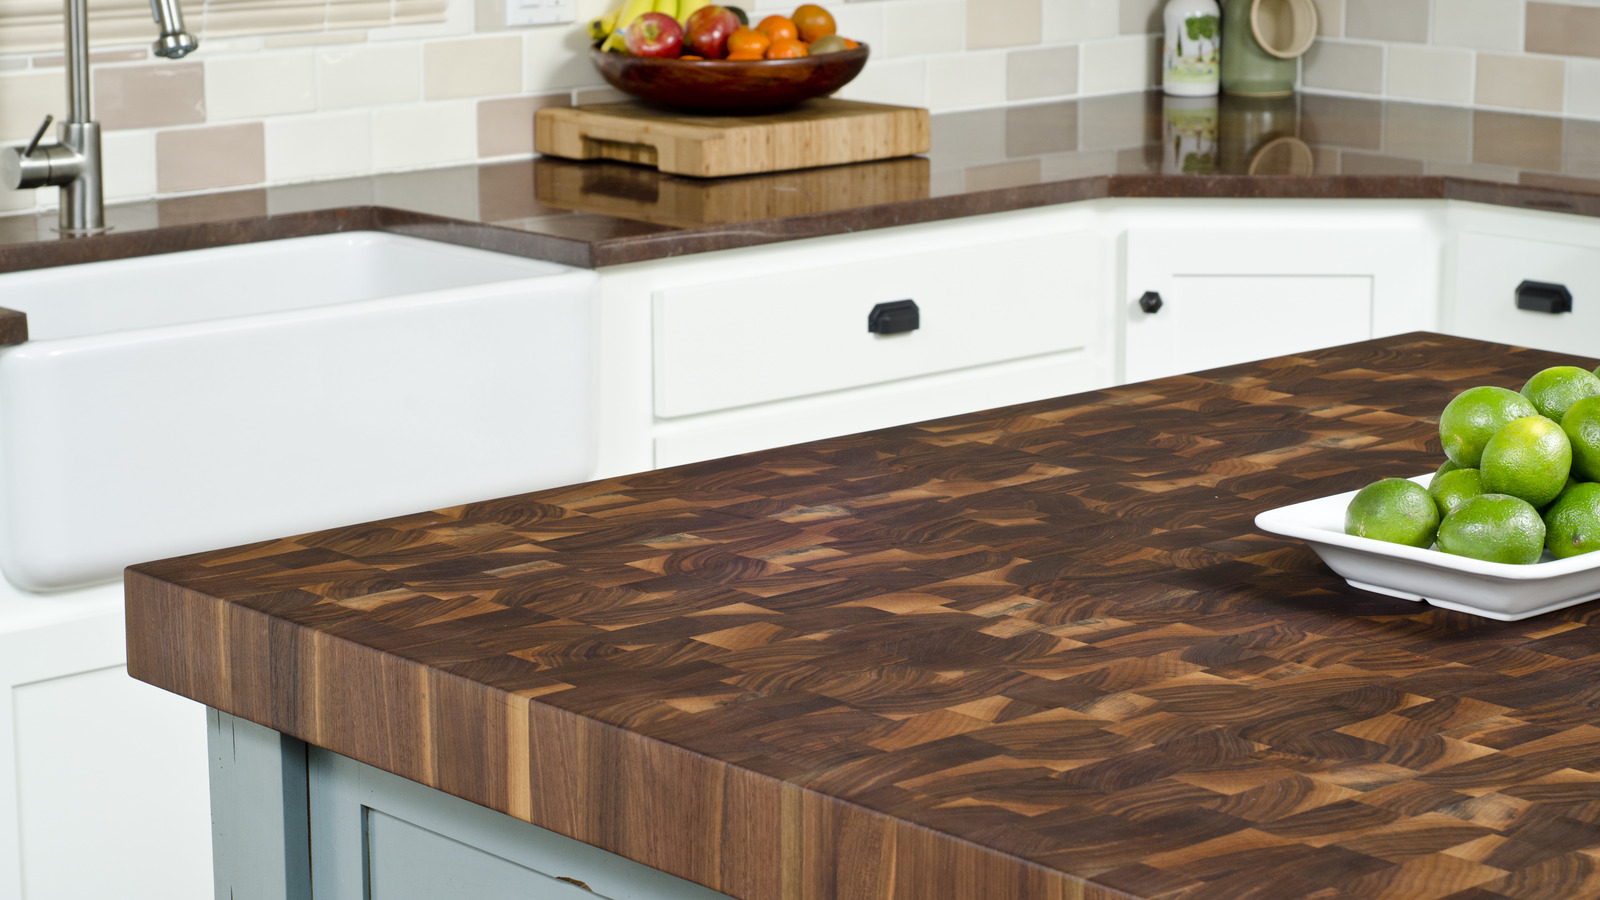 The Top Rated Wood Countertop Materials